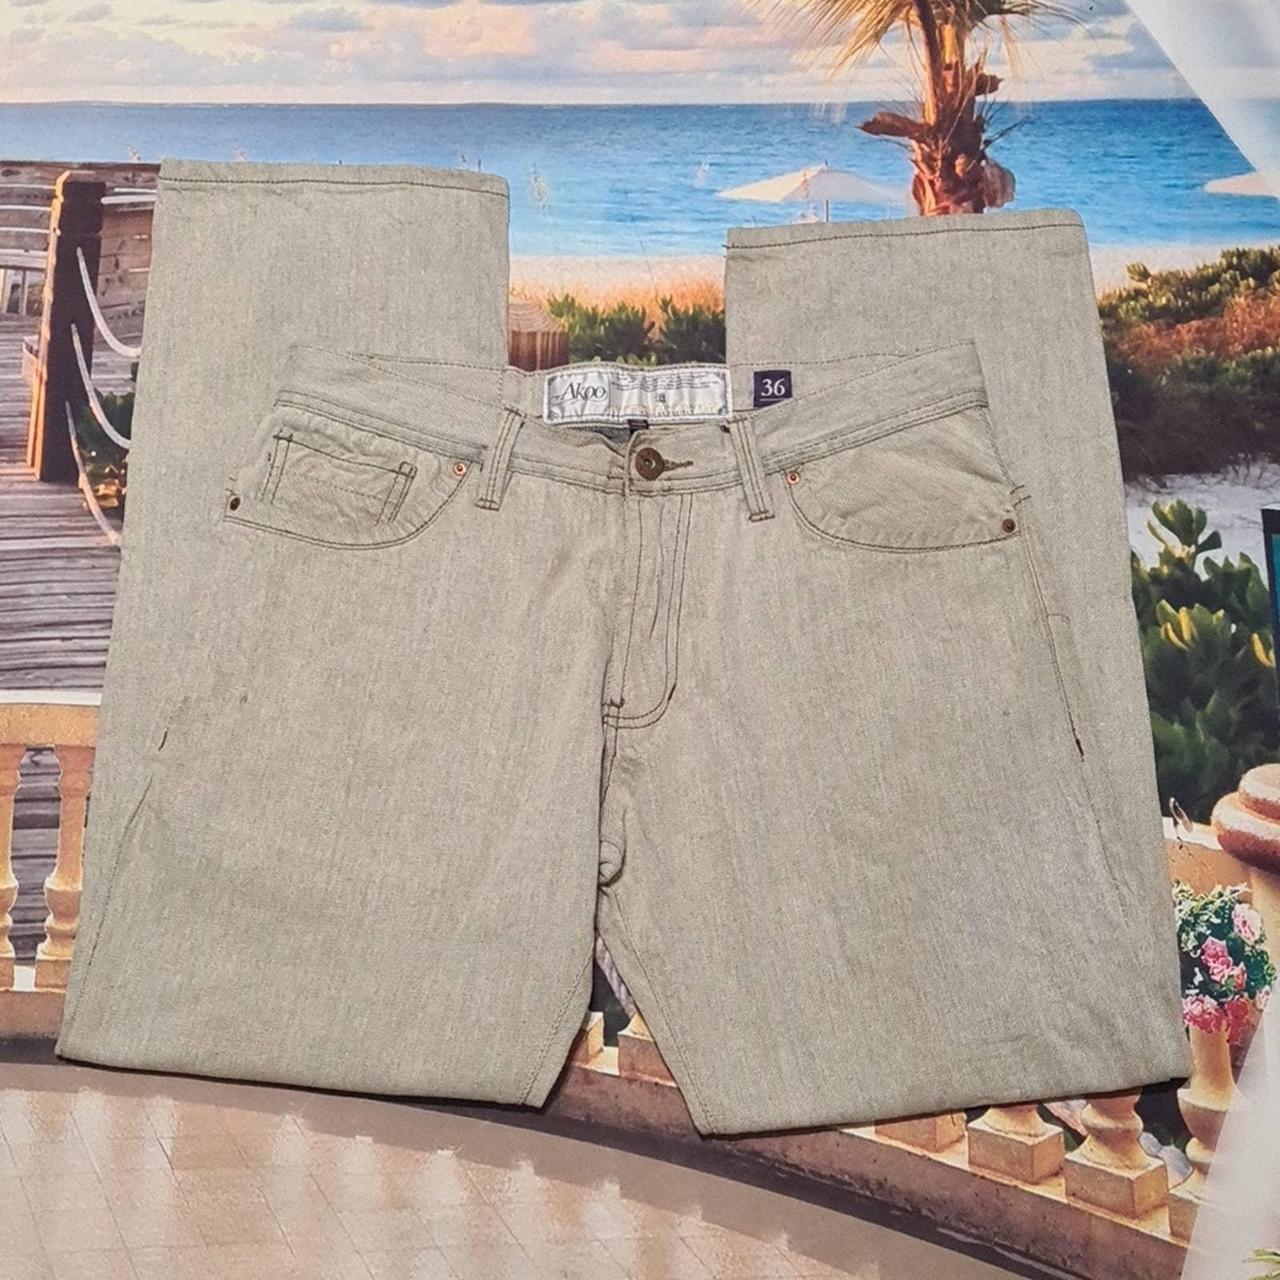 Product Image 2 - Akoo Beige Jeans Size 32x31

*tag